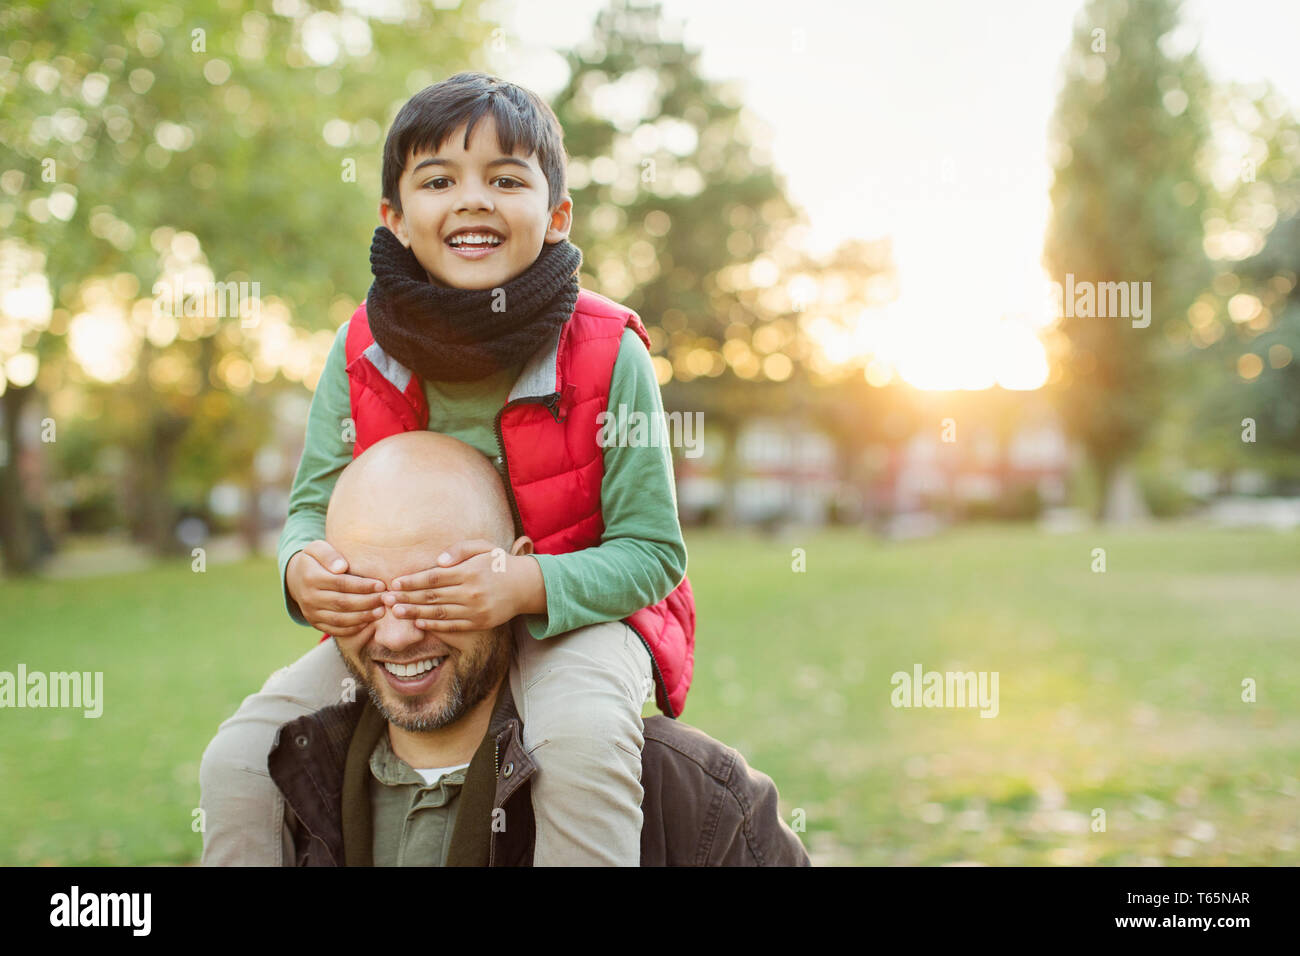 Portrait playful son riding on fathers shoulders in autumn park Stock Photo